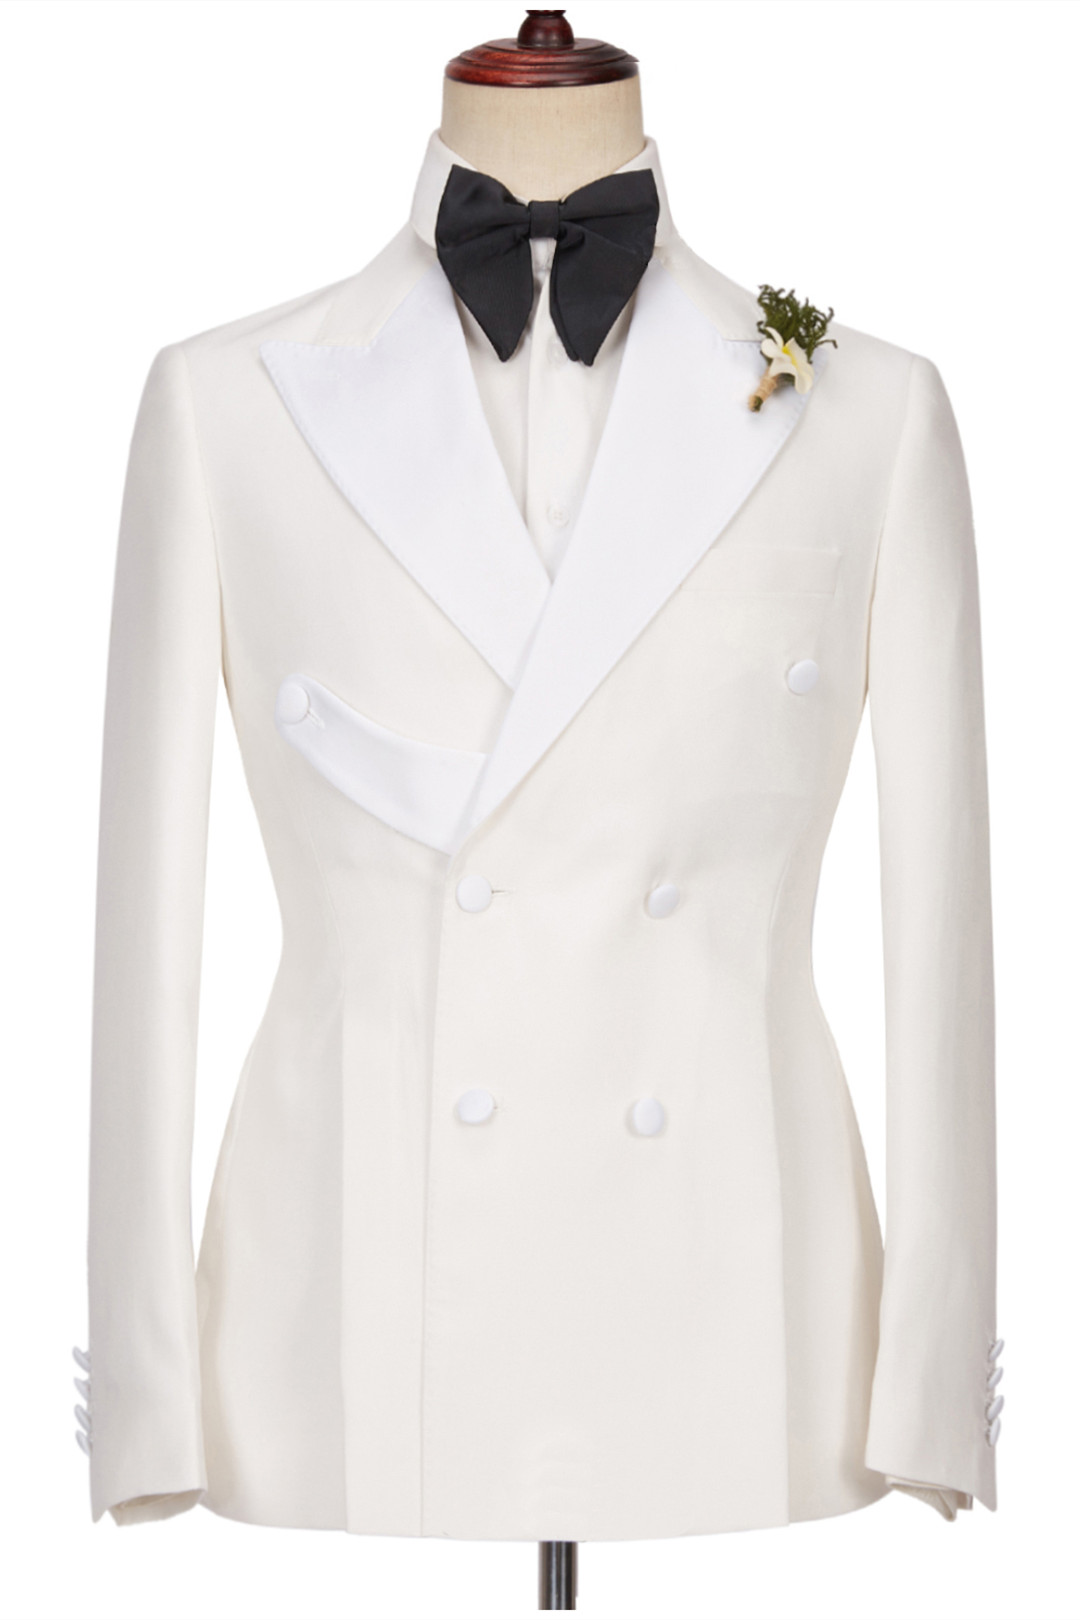 Chic White Two Pieces Peaked Lapel Double Breasted Wedding Suits - lulusllly